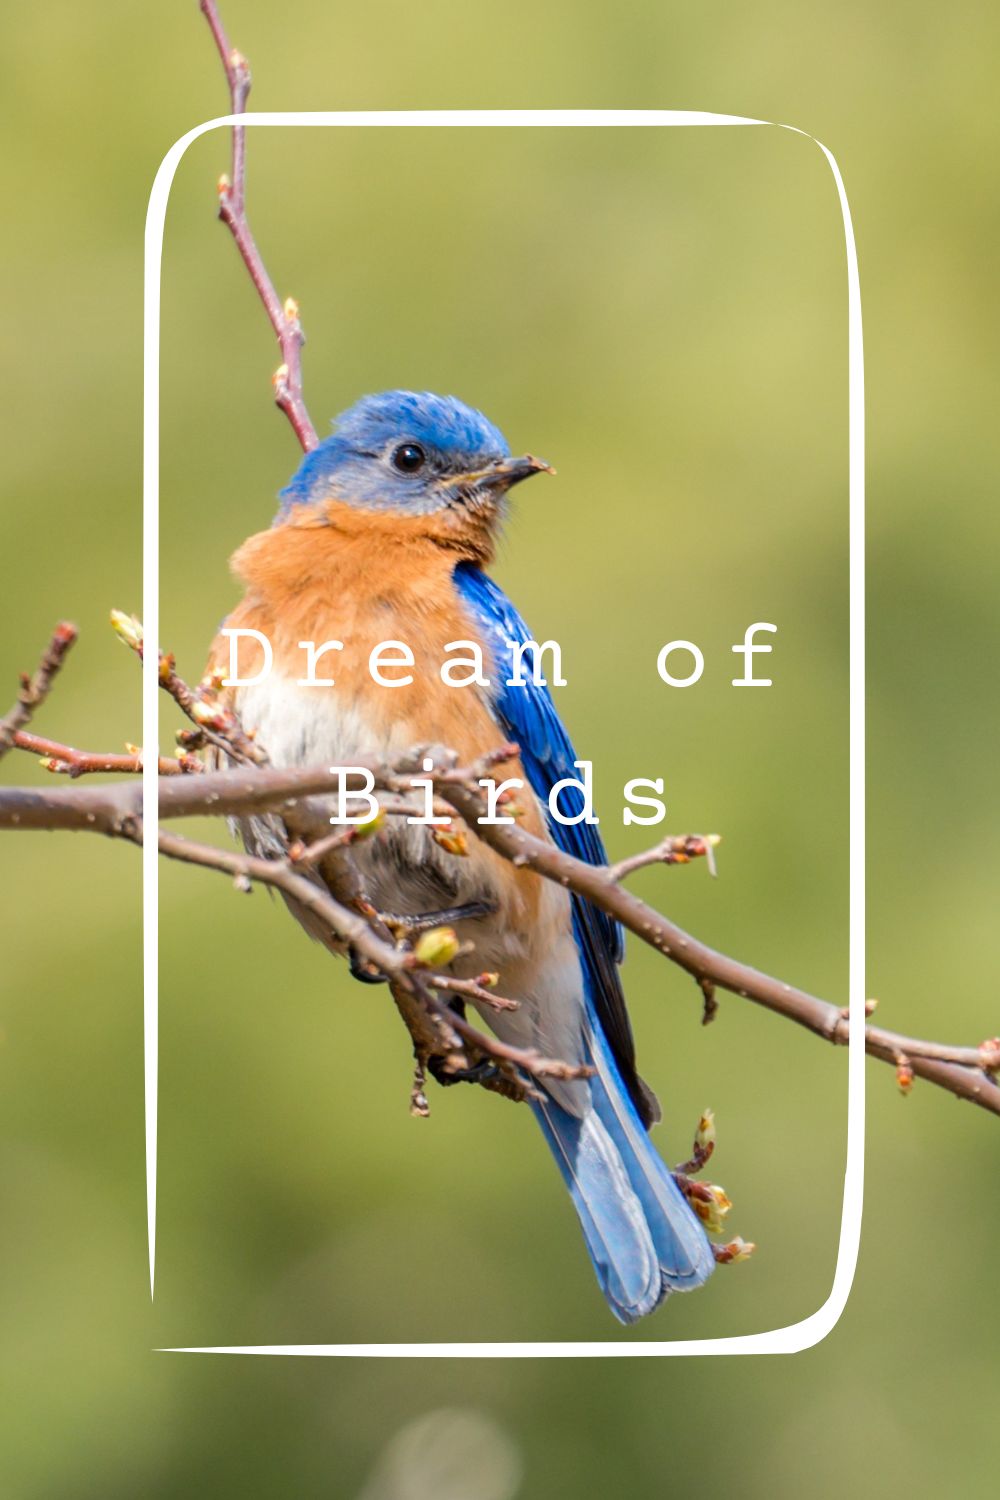 20 Dream of Birds Meanings4